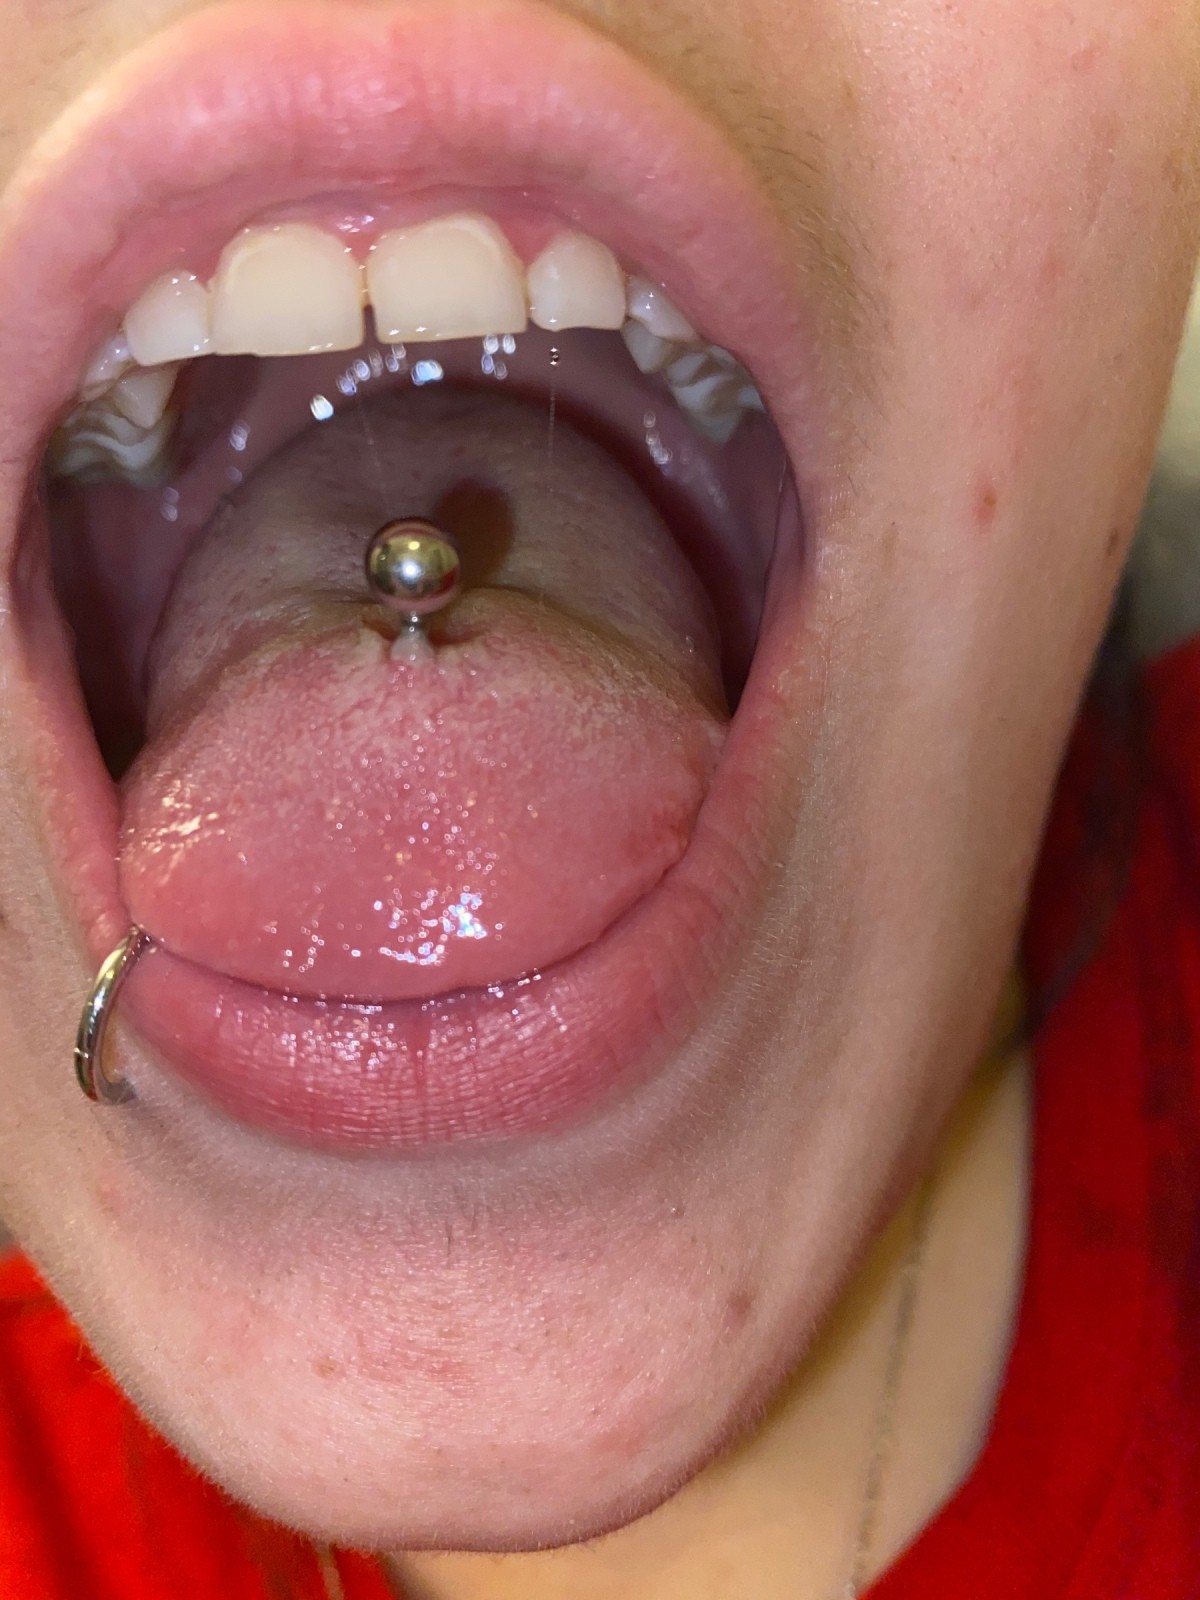 bumps on tongue pictures